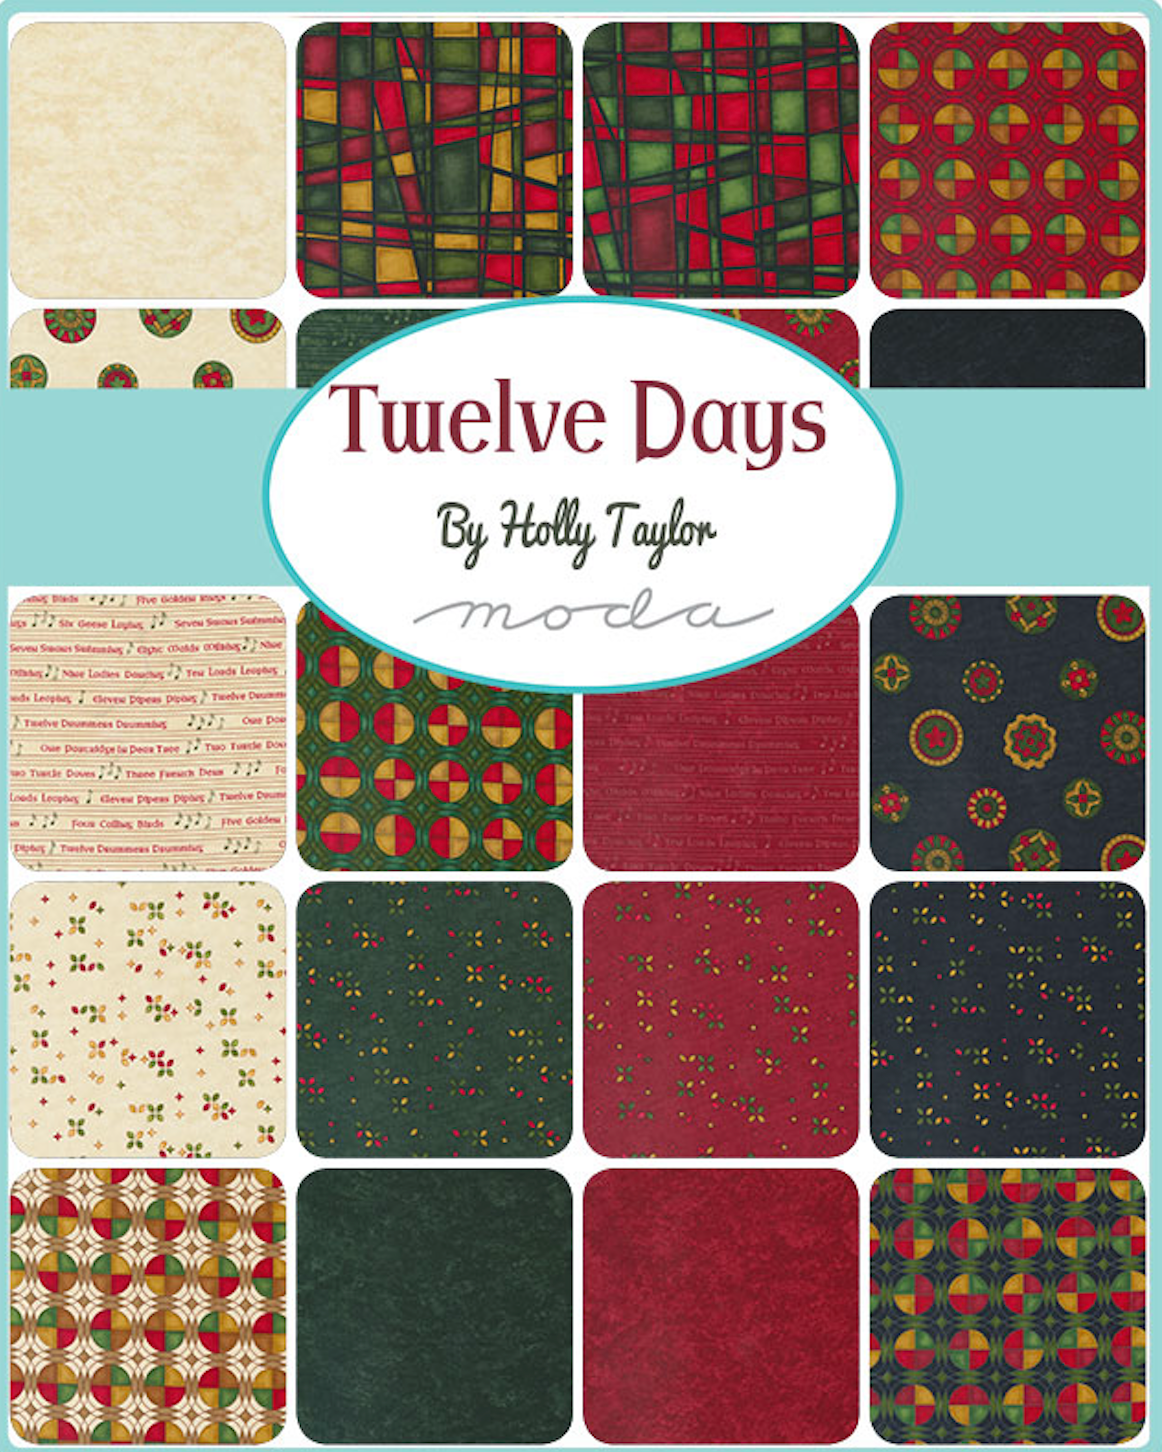 Twelve Days by Holly Taylor